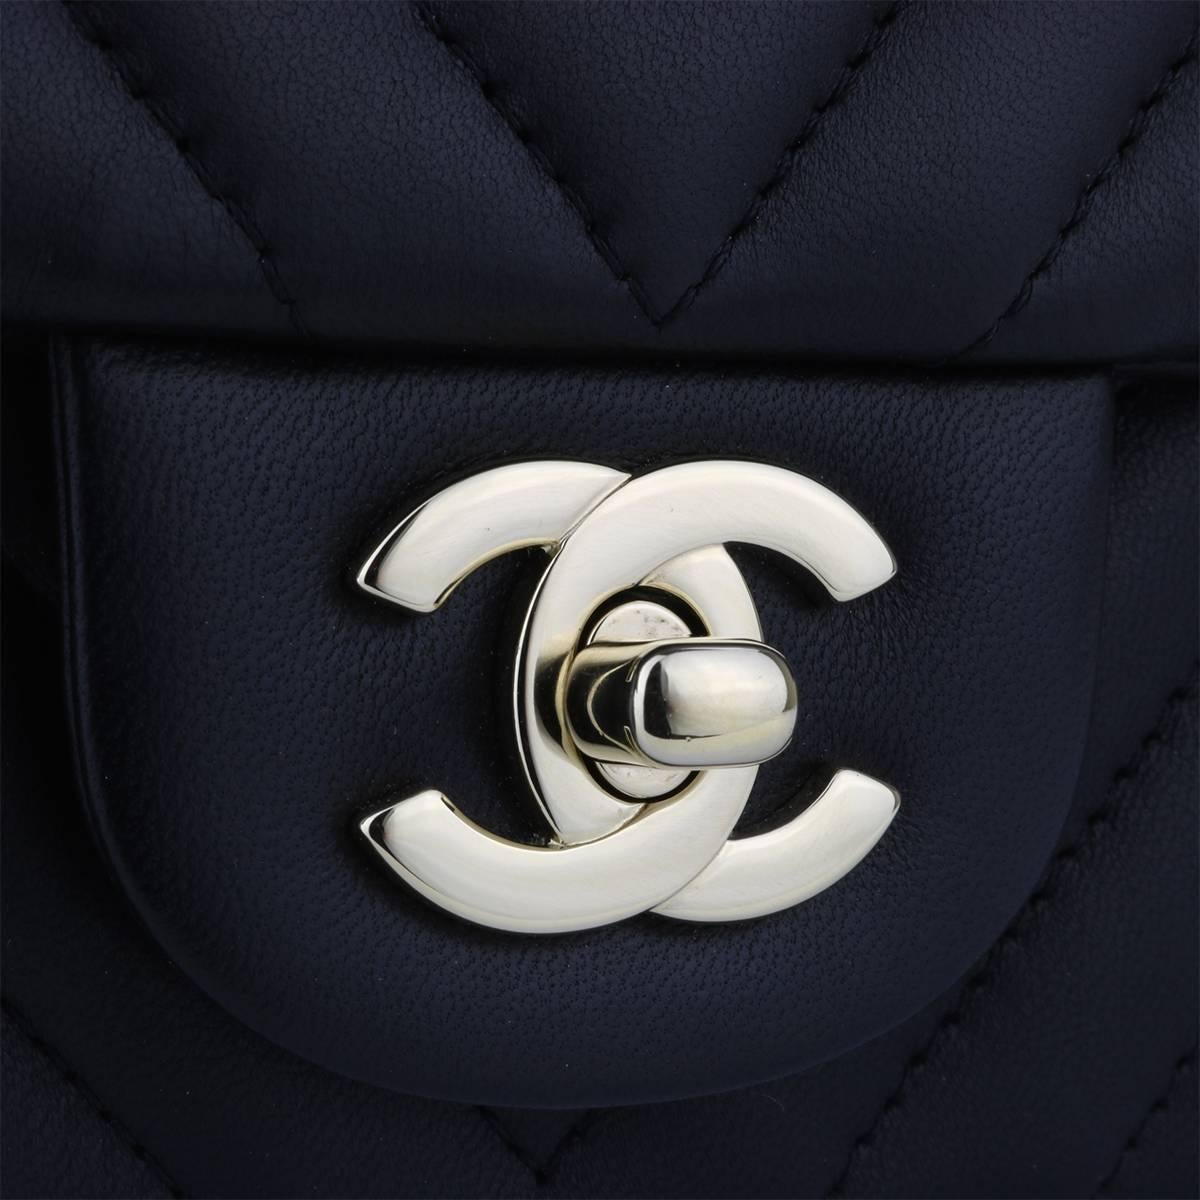 Authentic CHANEL Classic Square Mini Chevron Black Lambskin with Light Gold Hardware 2017.

This stunning bag is still in pristine-brand new condition-with original tag still attached. The bag still holds the original shape and hardware still shiny,